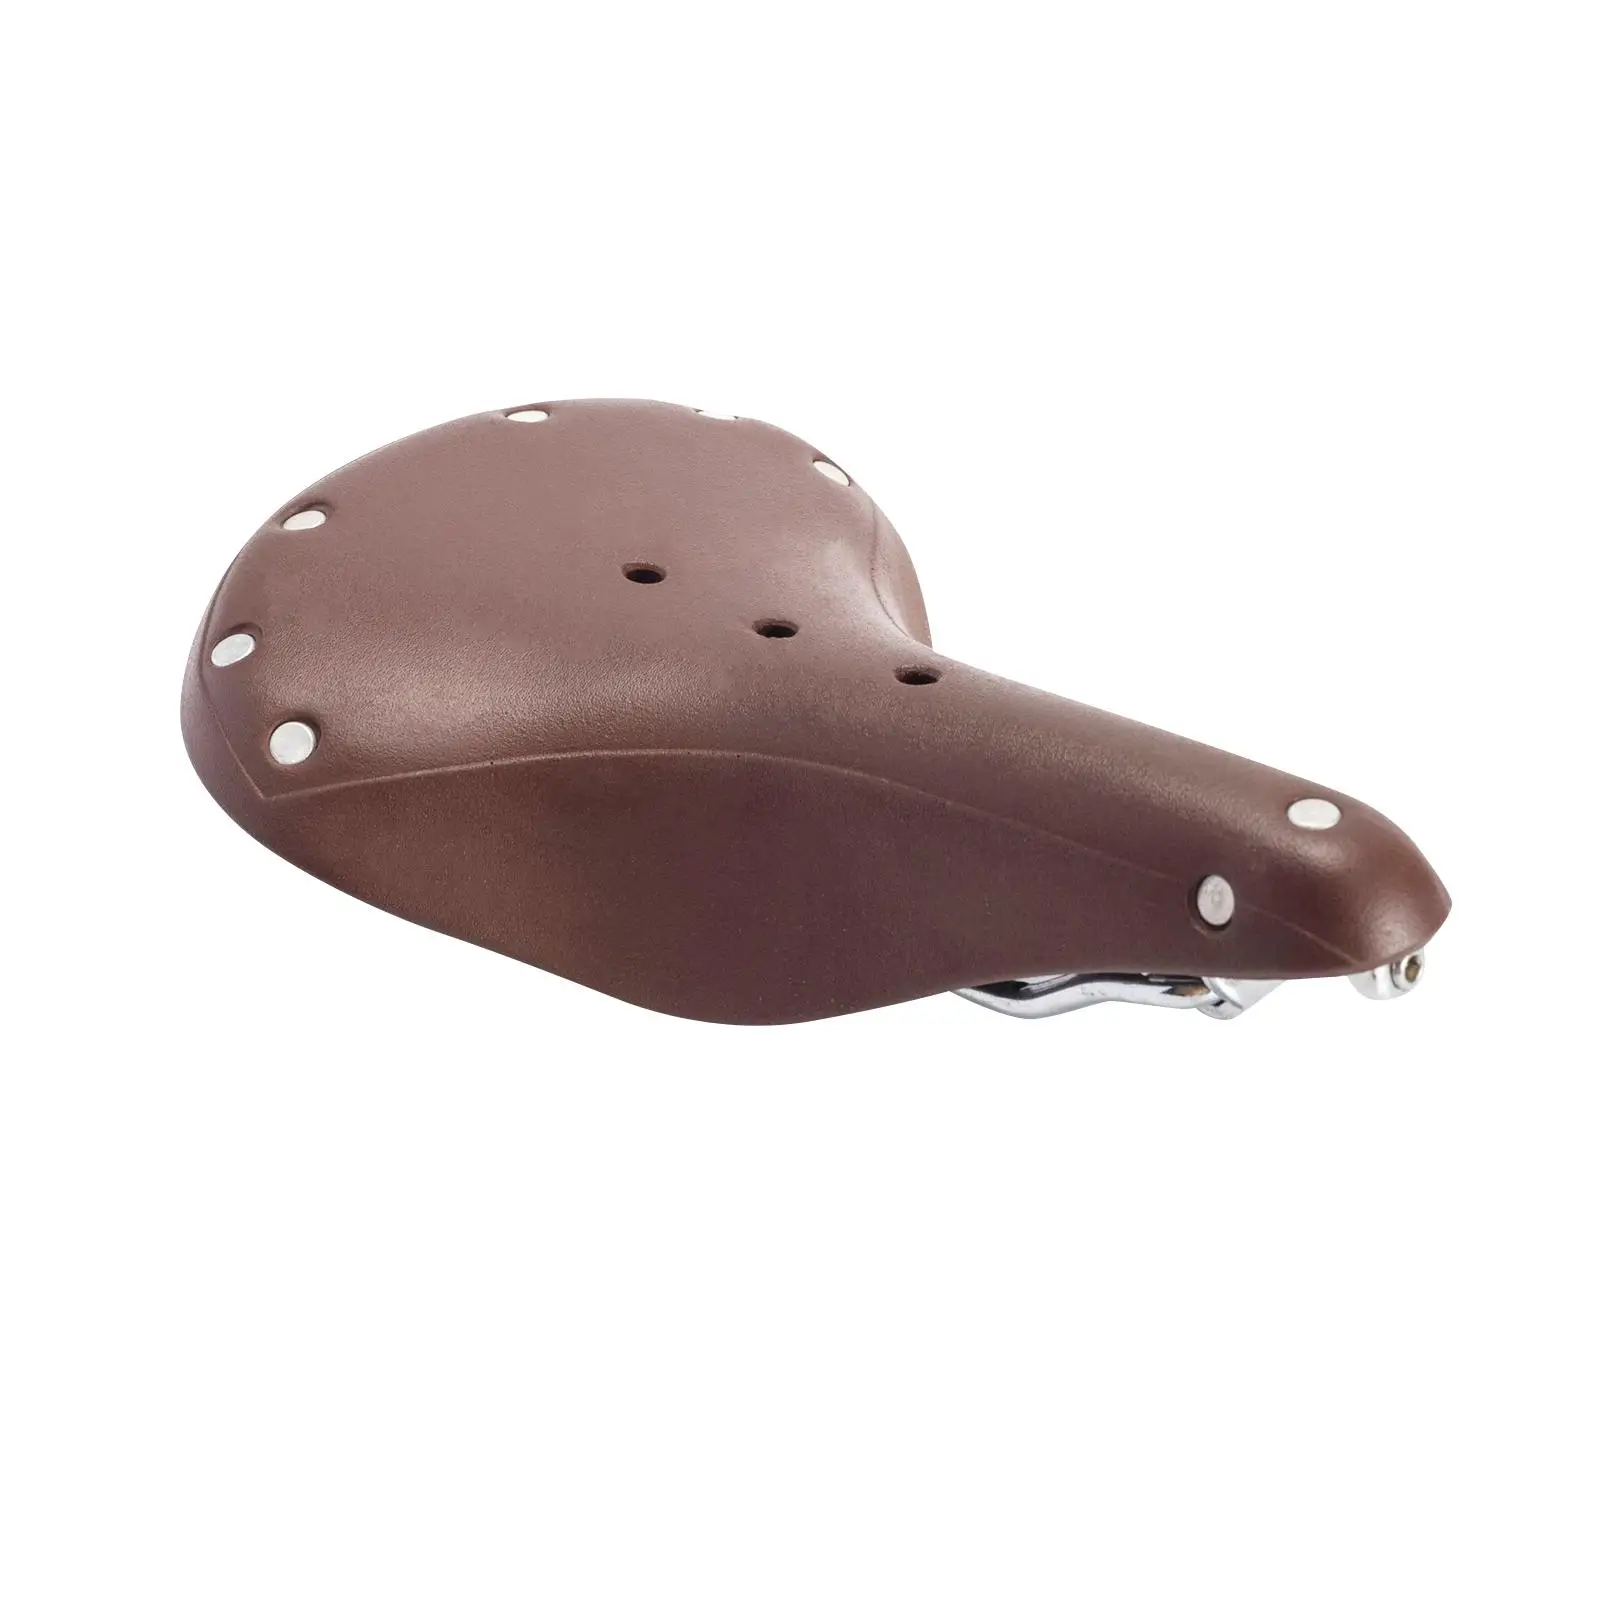 Bicycle Seat Vintage Parts Spring Cushion Replacement Shockproof Bicycle Saddle Cushion for Exercise Bike Road Mountain